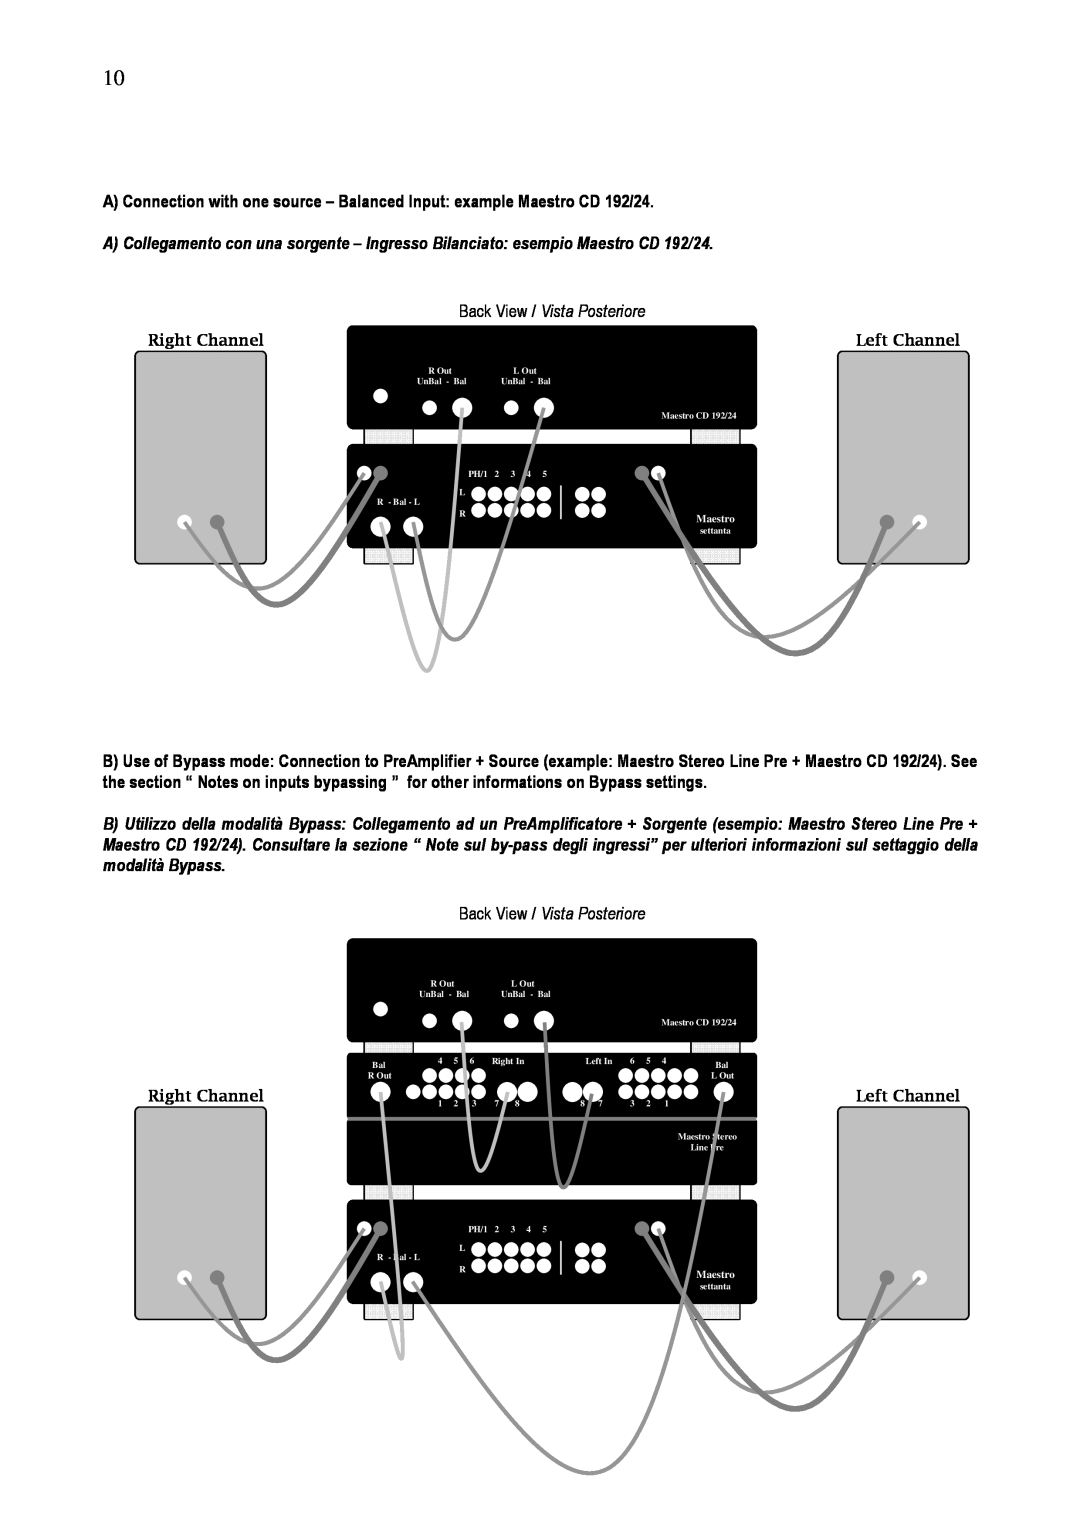 Audio Analogue SRL Maestro Settanta owner manual Back View / Vista Posteriore, Right Channel, Left Channel 